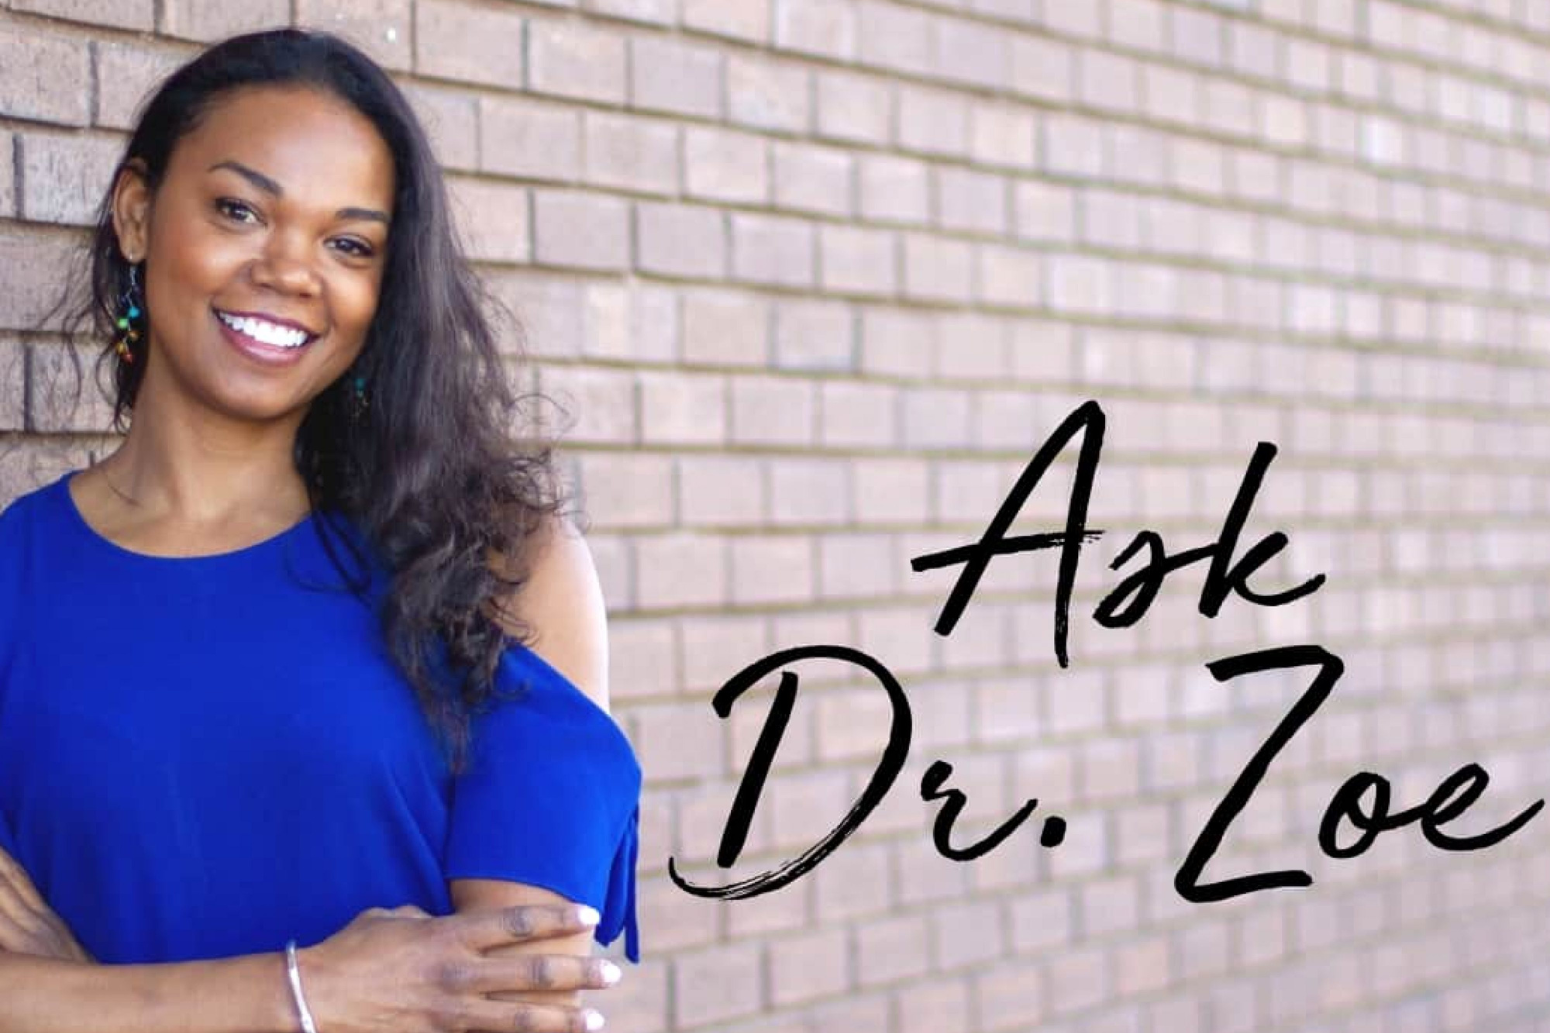 Ask Dr. Zoe - Should I Stay in My Marriage at the Cost of My Happiness?